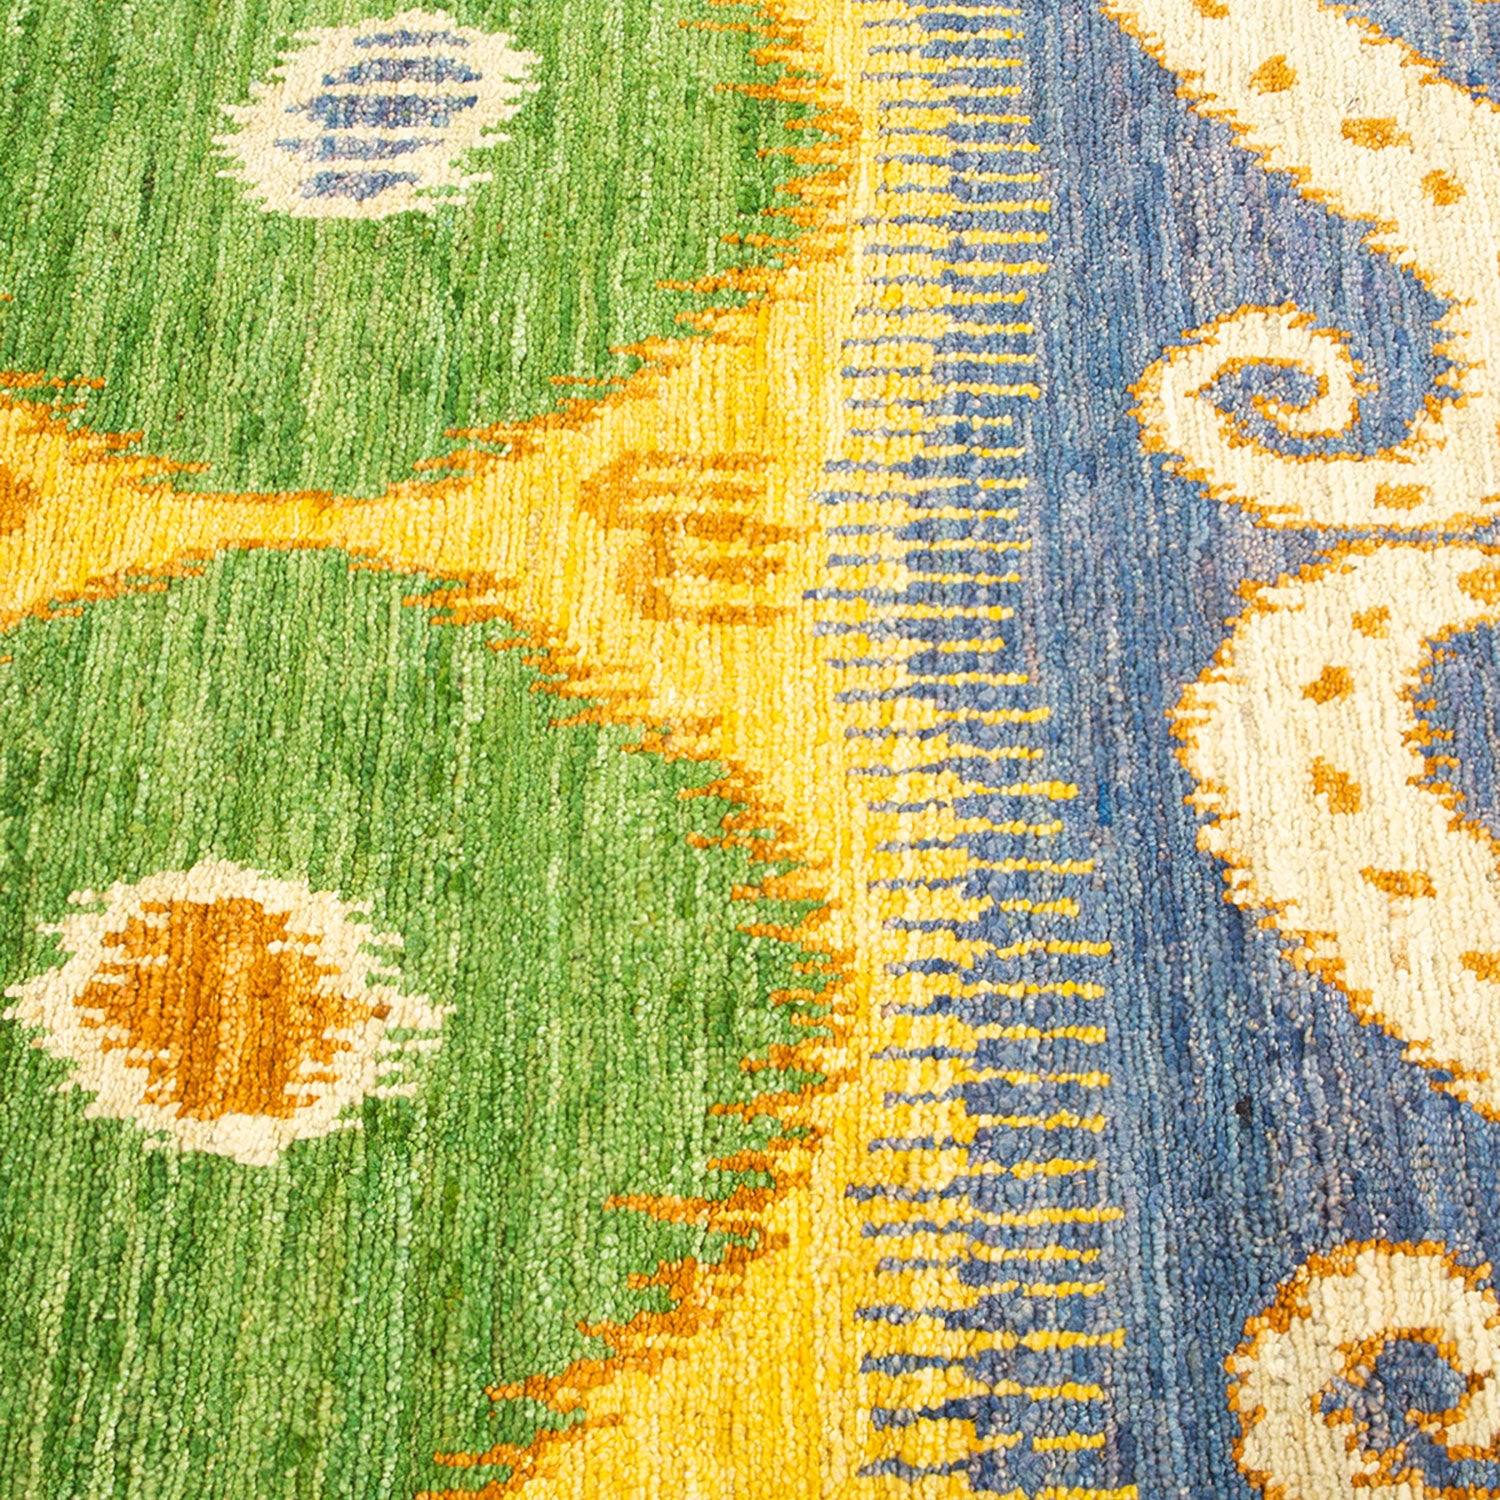 Close-up view of a vibrant, intricately designed floral patterned carpet.